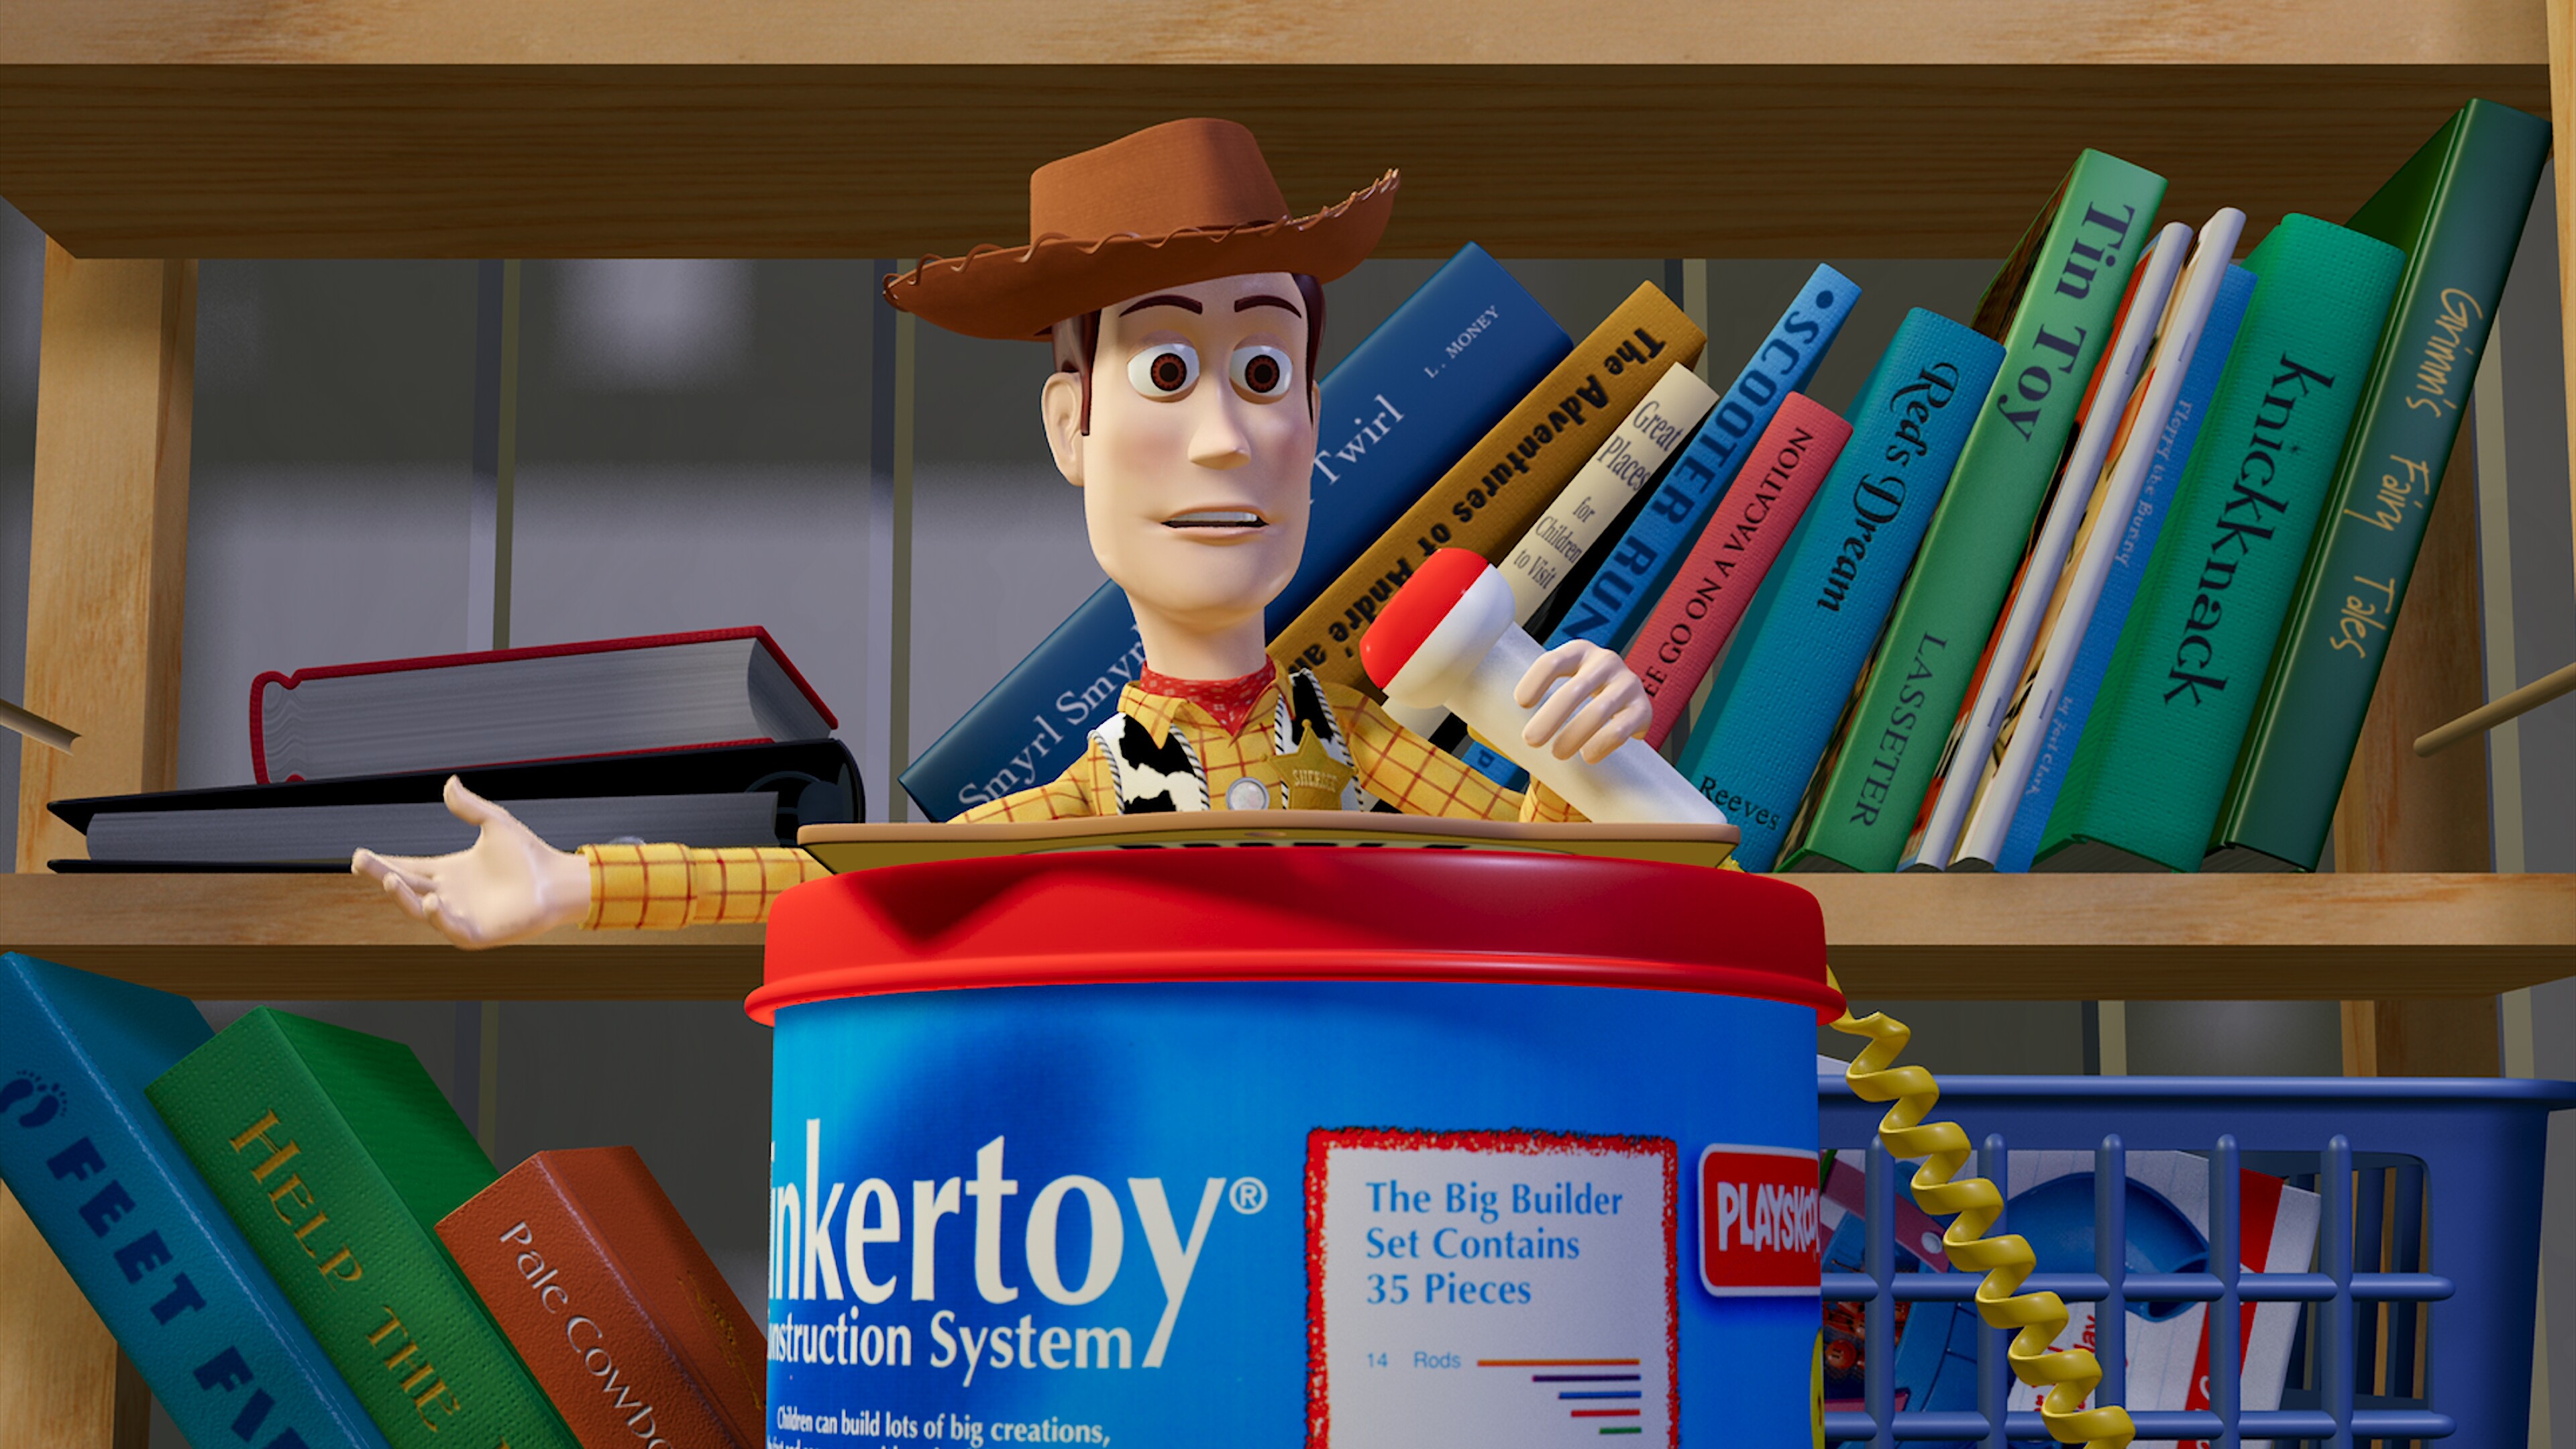 Toy Story Ultra HD Blu-ray, High-definition review, Stunning visuals, Blu-ray experience, 3840x2160 4K Desktop